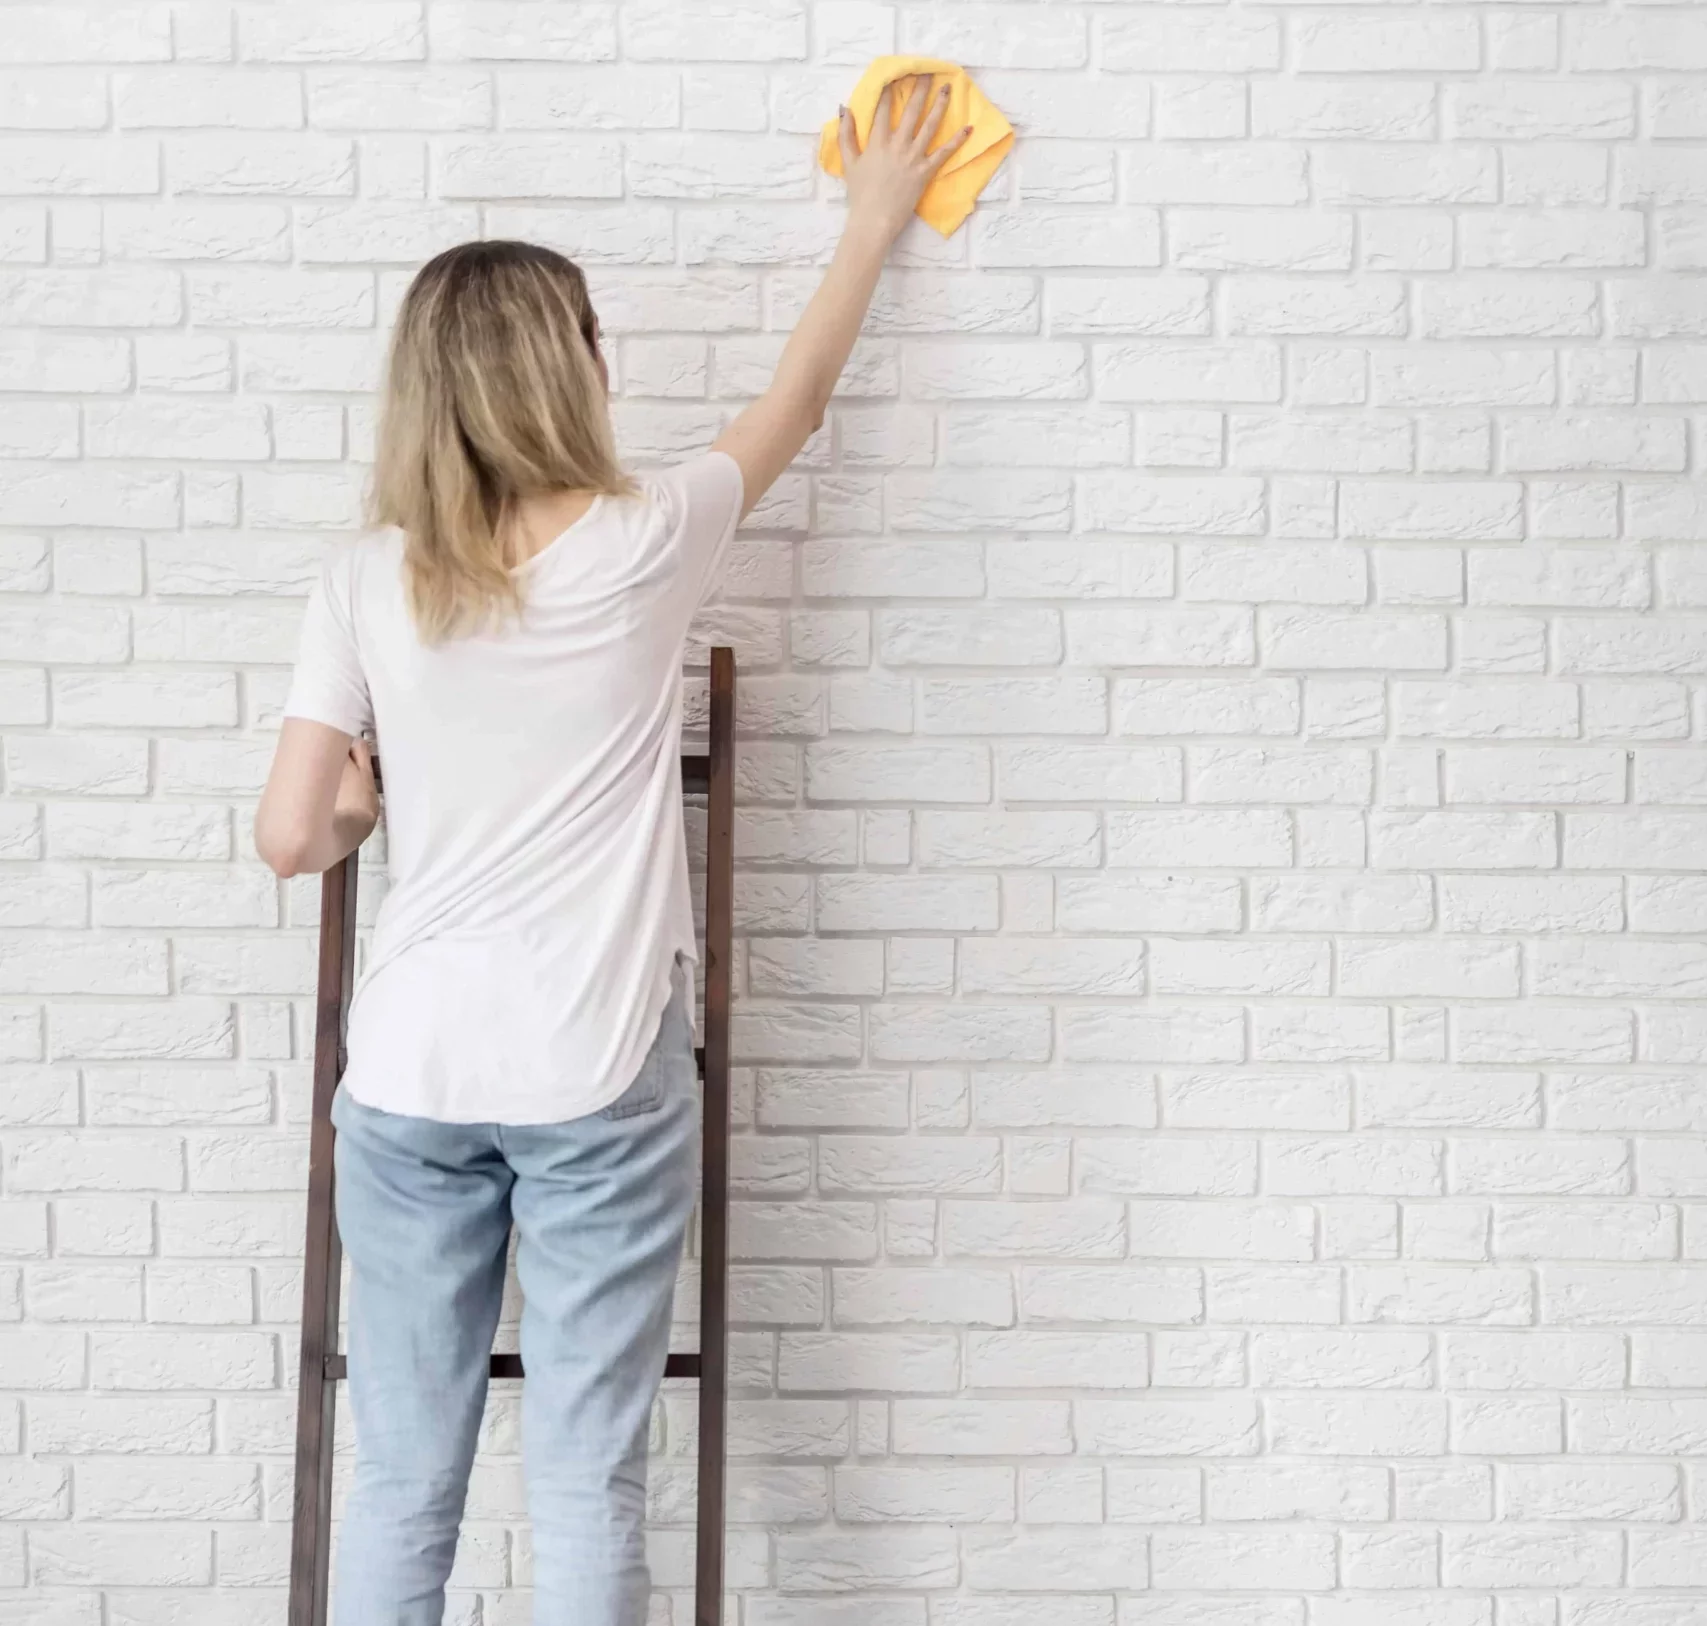 woman standing on a ladder to clean the wall with a yellow cleaning cloth